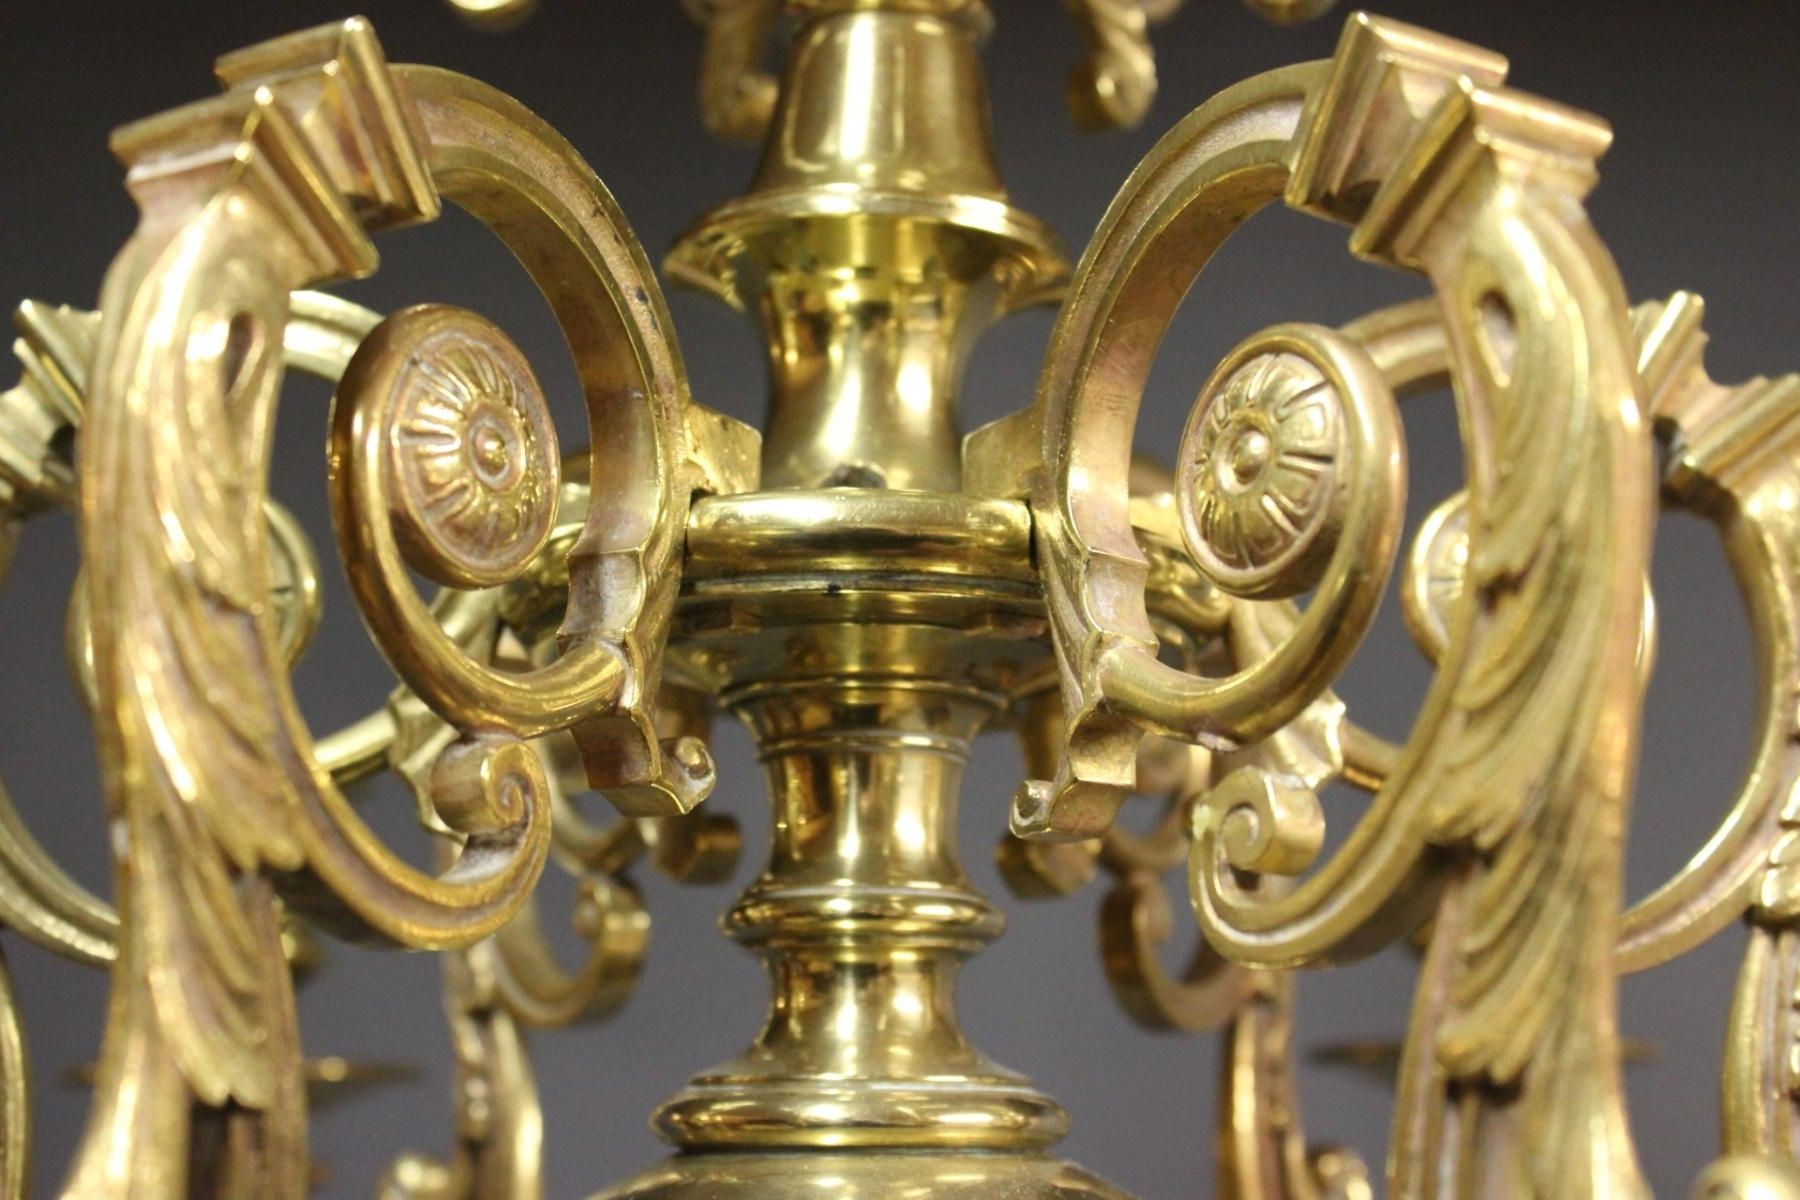 2019 Brass Chandeliers In Antique Brass Church Chandelier, 1850s For Sale At Pamono (View 10 of 20)